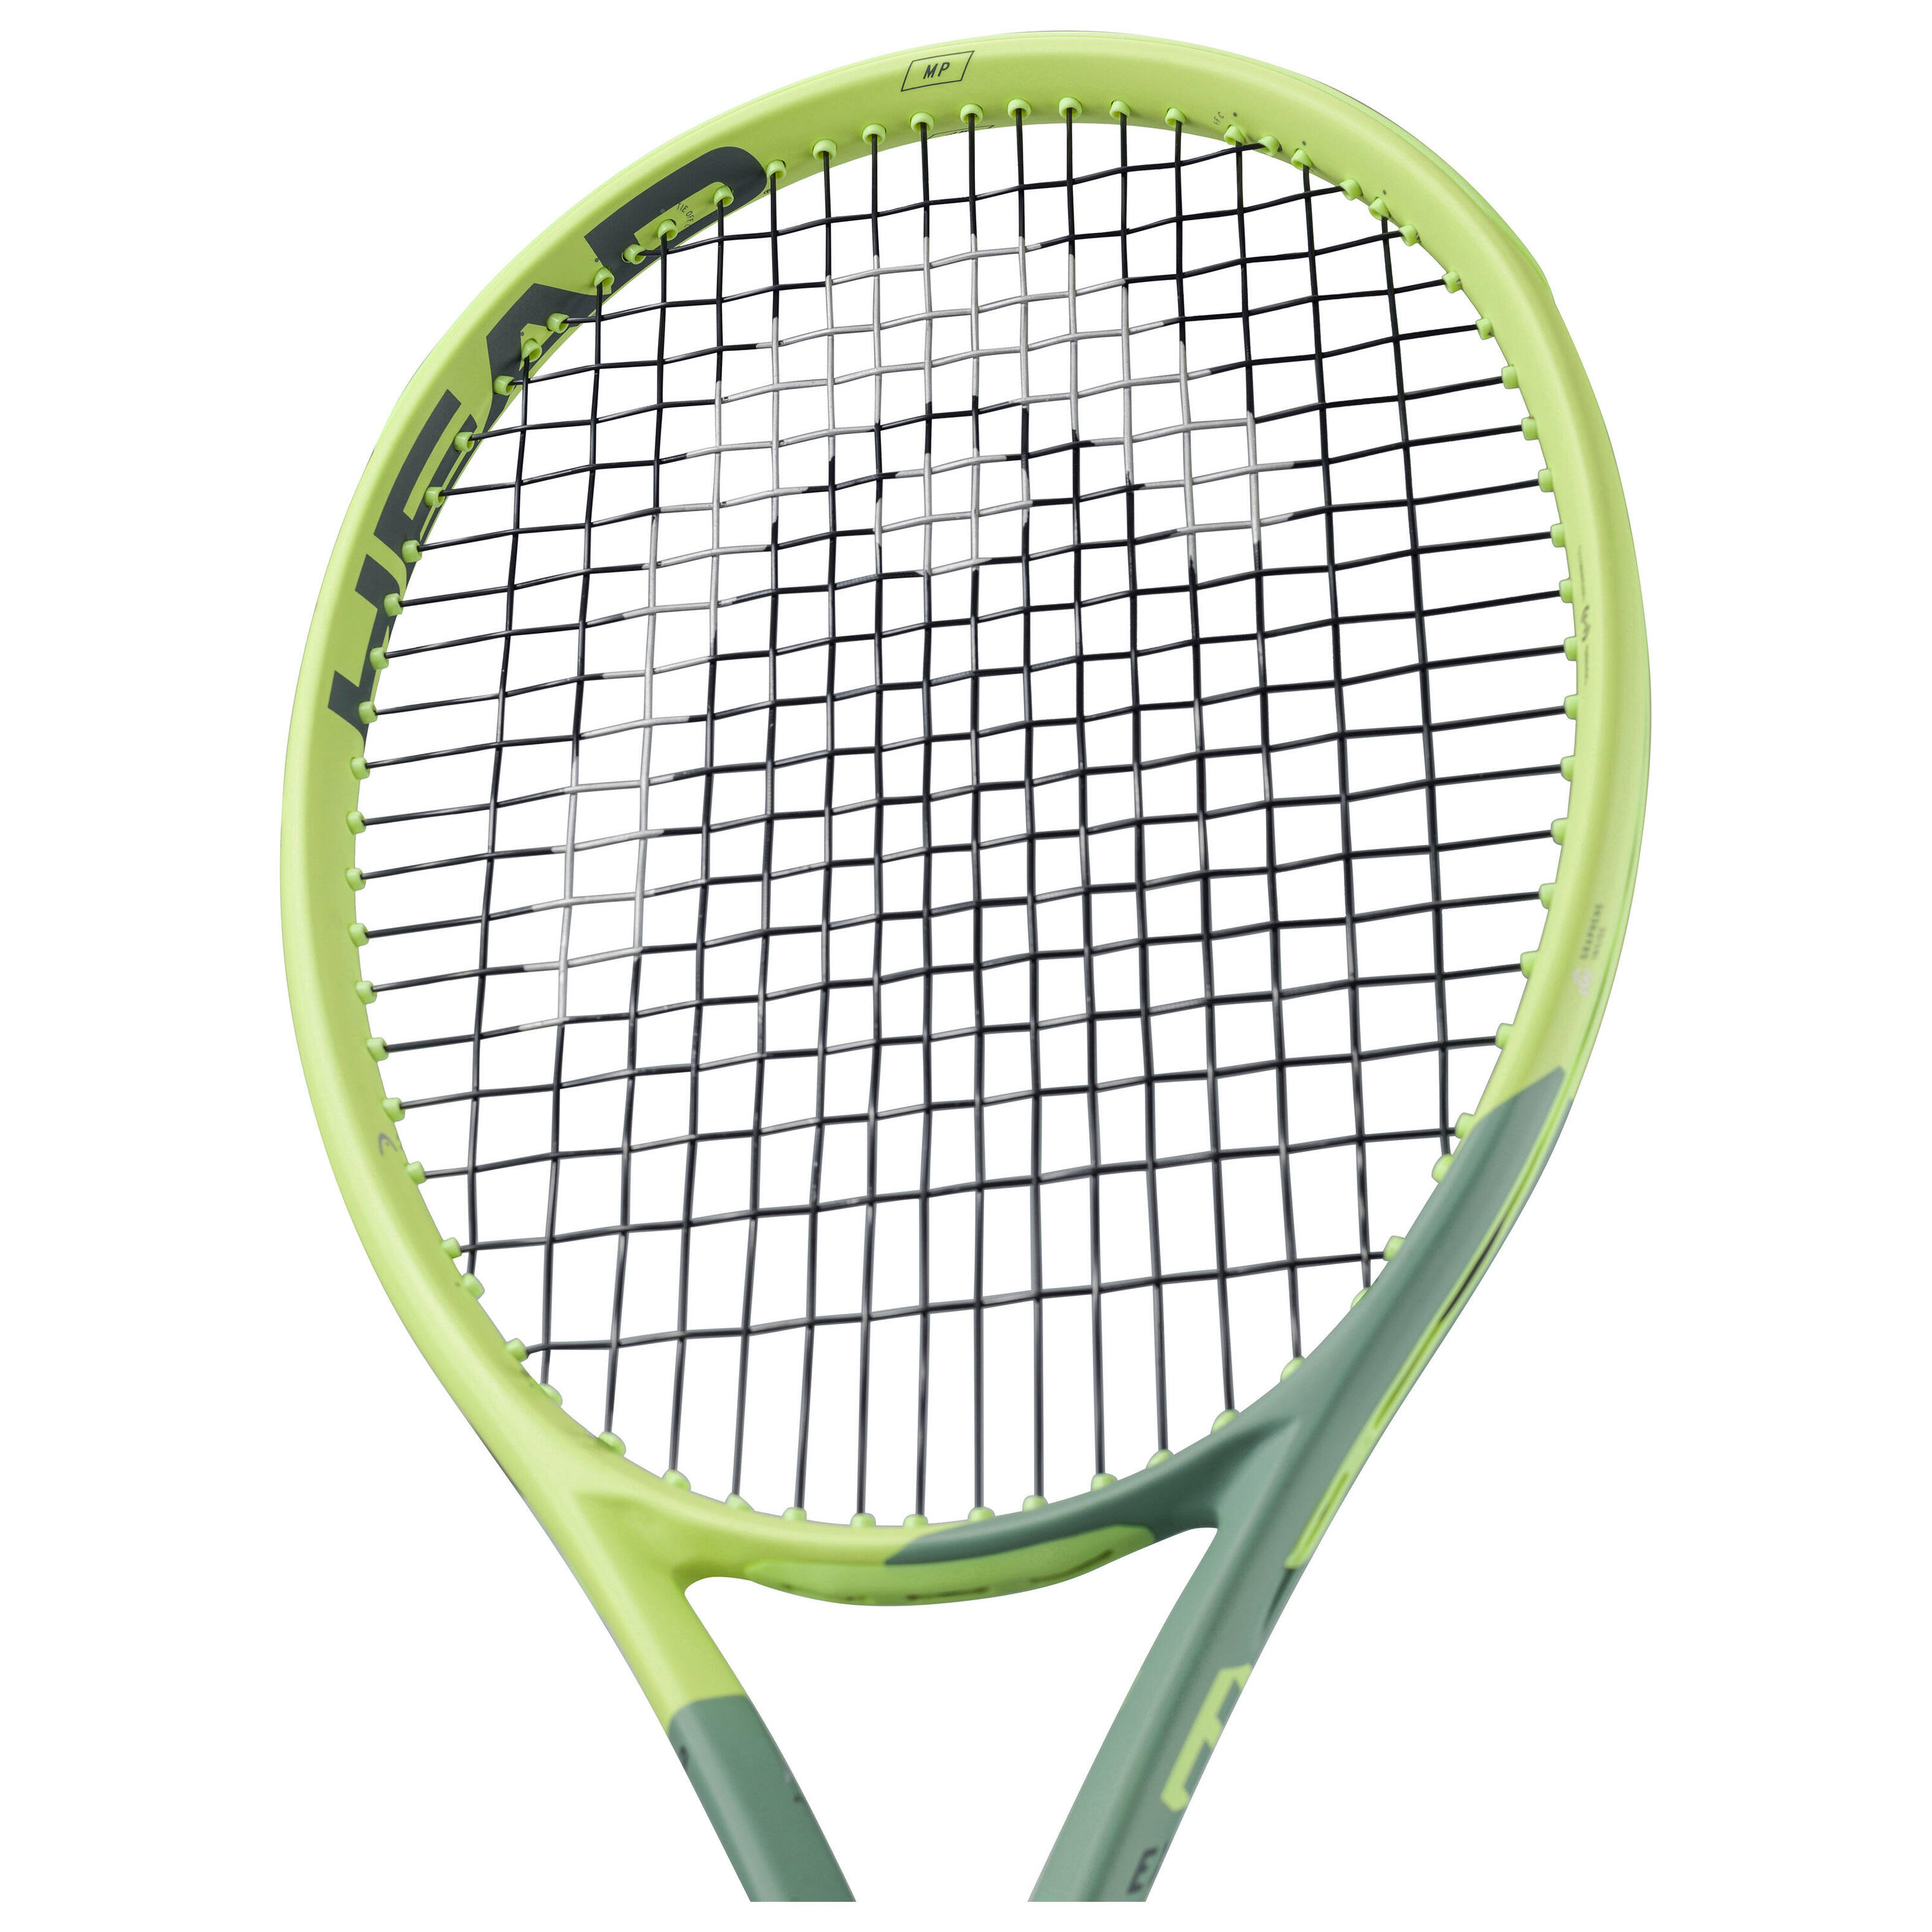 Adult Tennis Racket Auxetic Extreme MP 300 g- Grey/Yellow 6/9